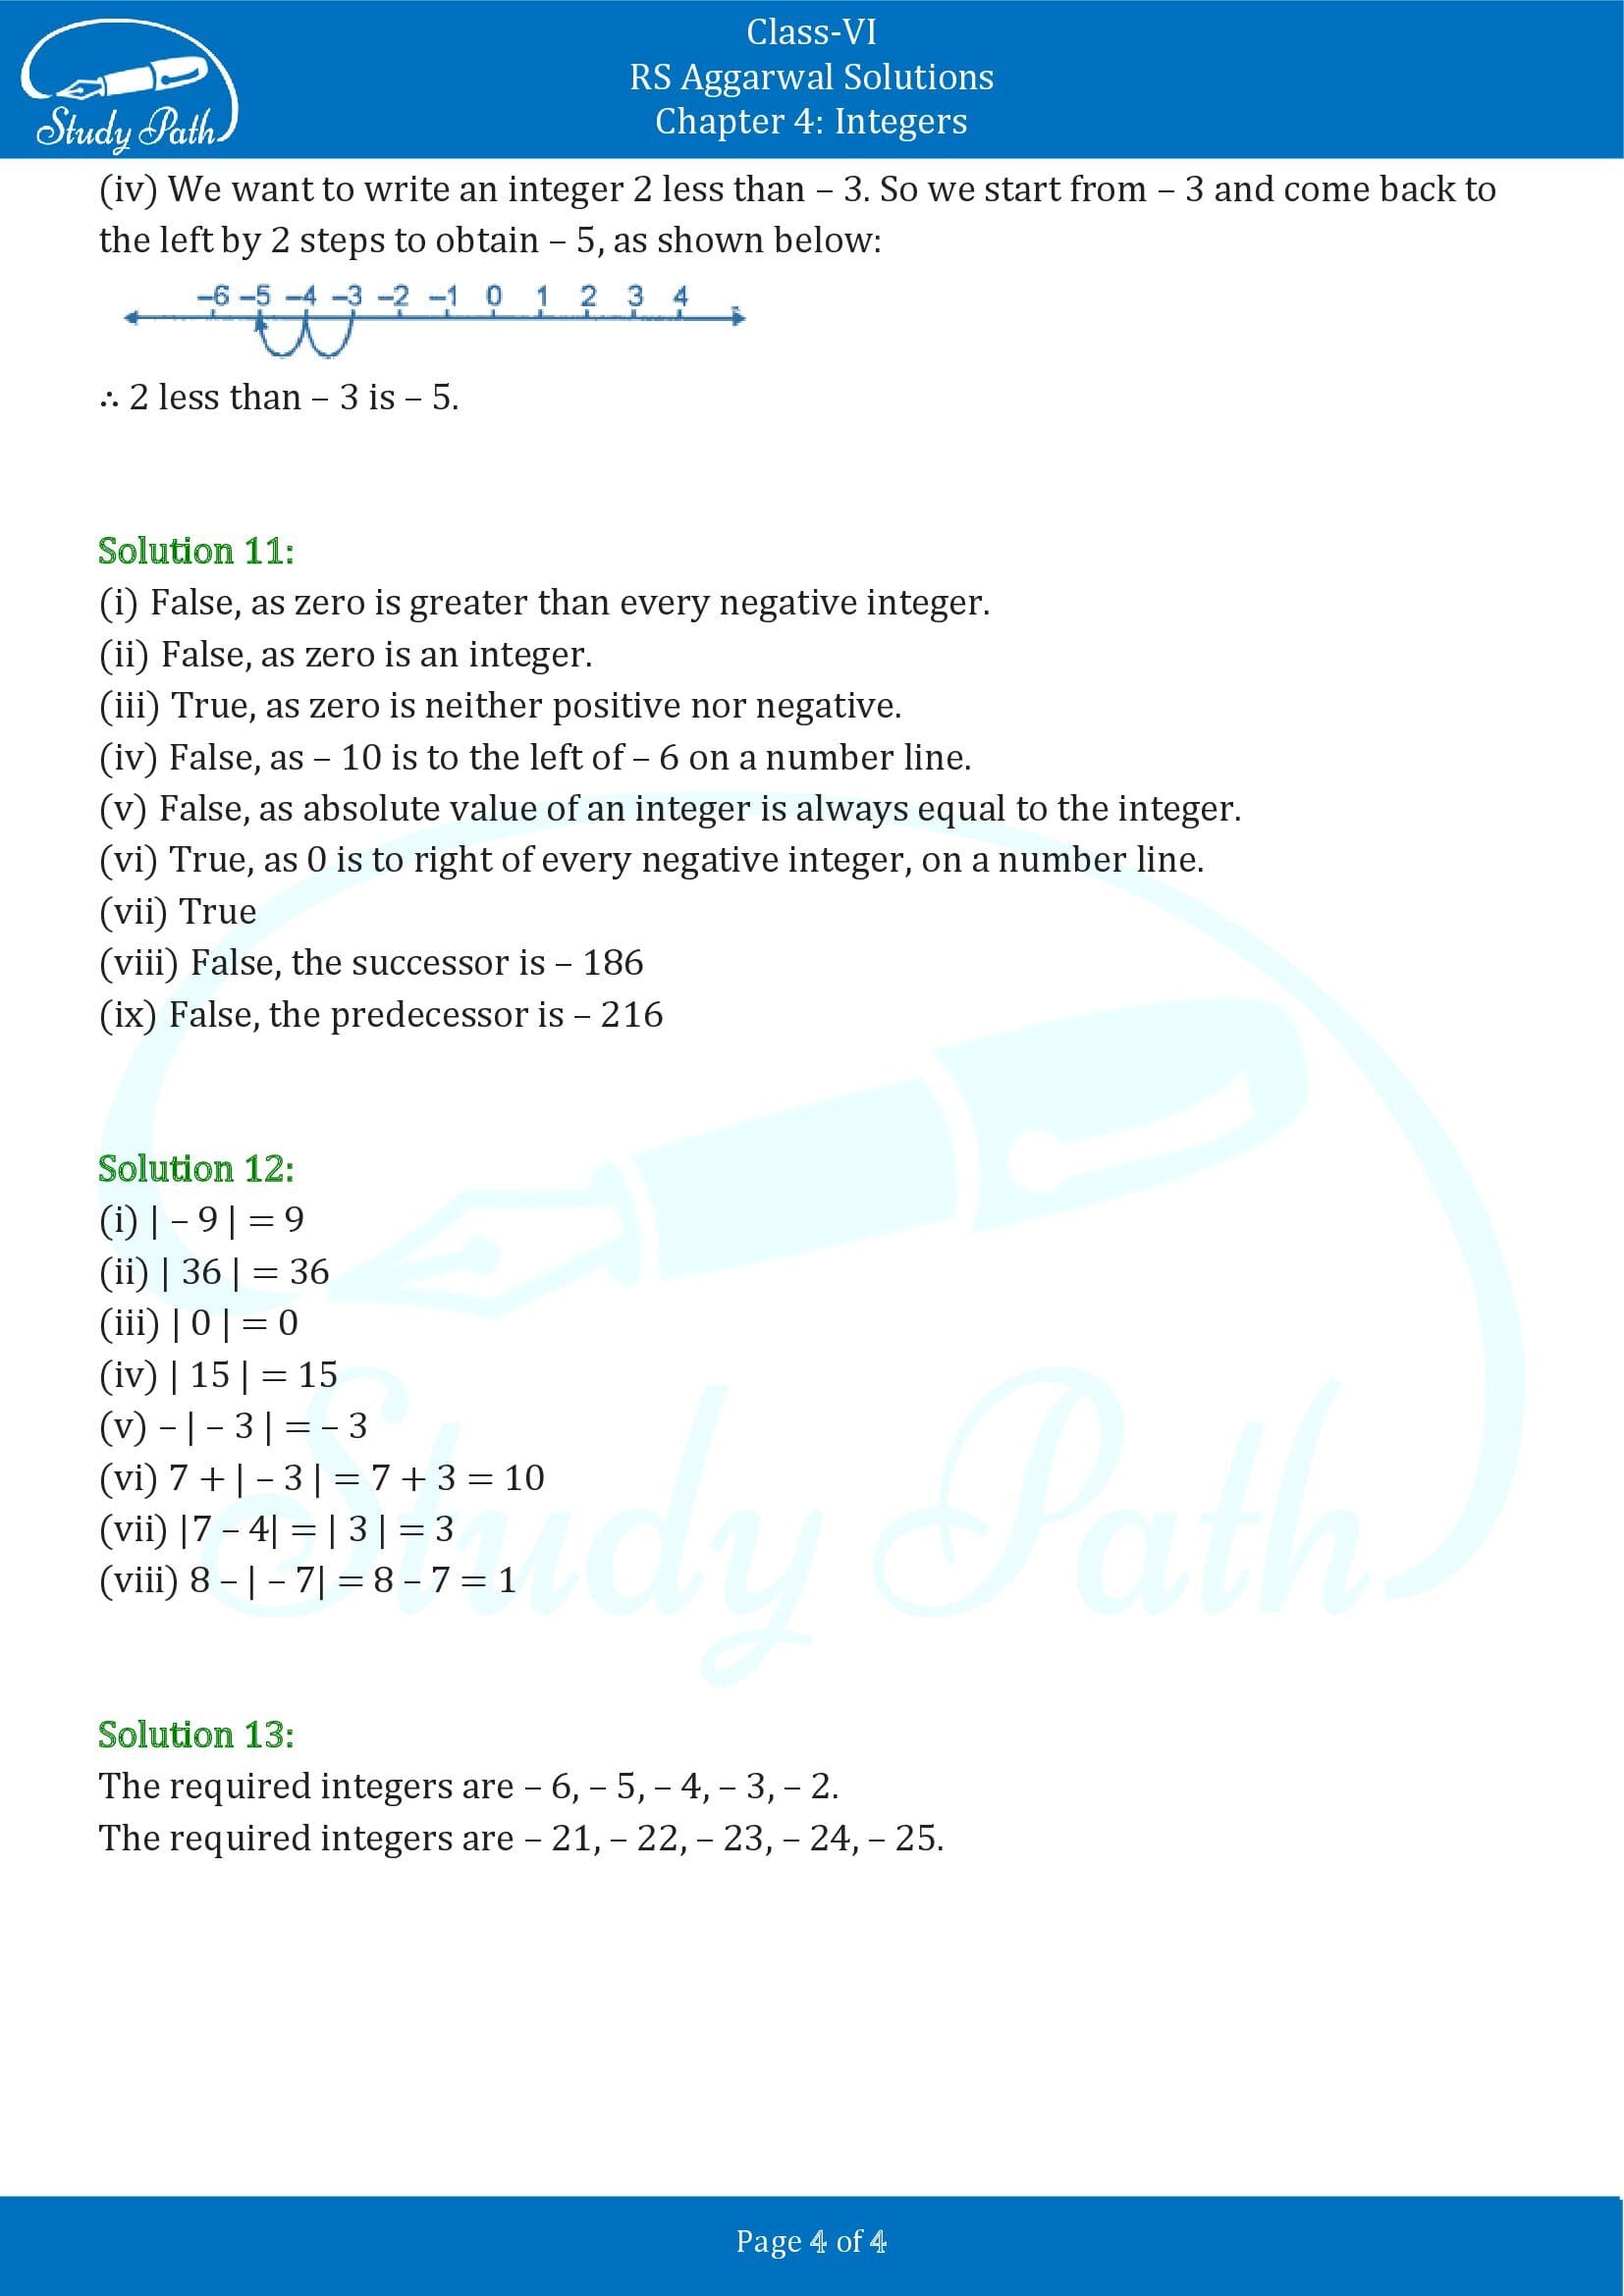 RS Aggarwal Solutions Class 6 Chapter 4 Integers Exercise 4A 00004